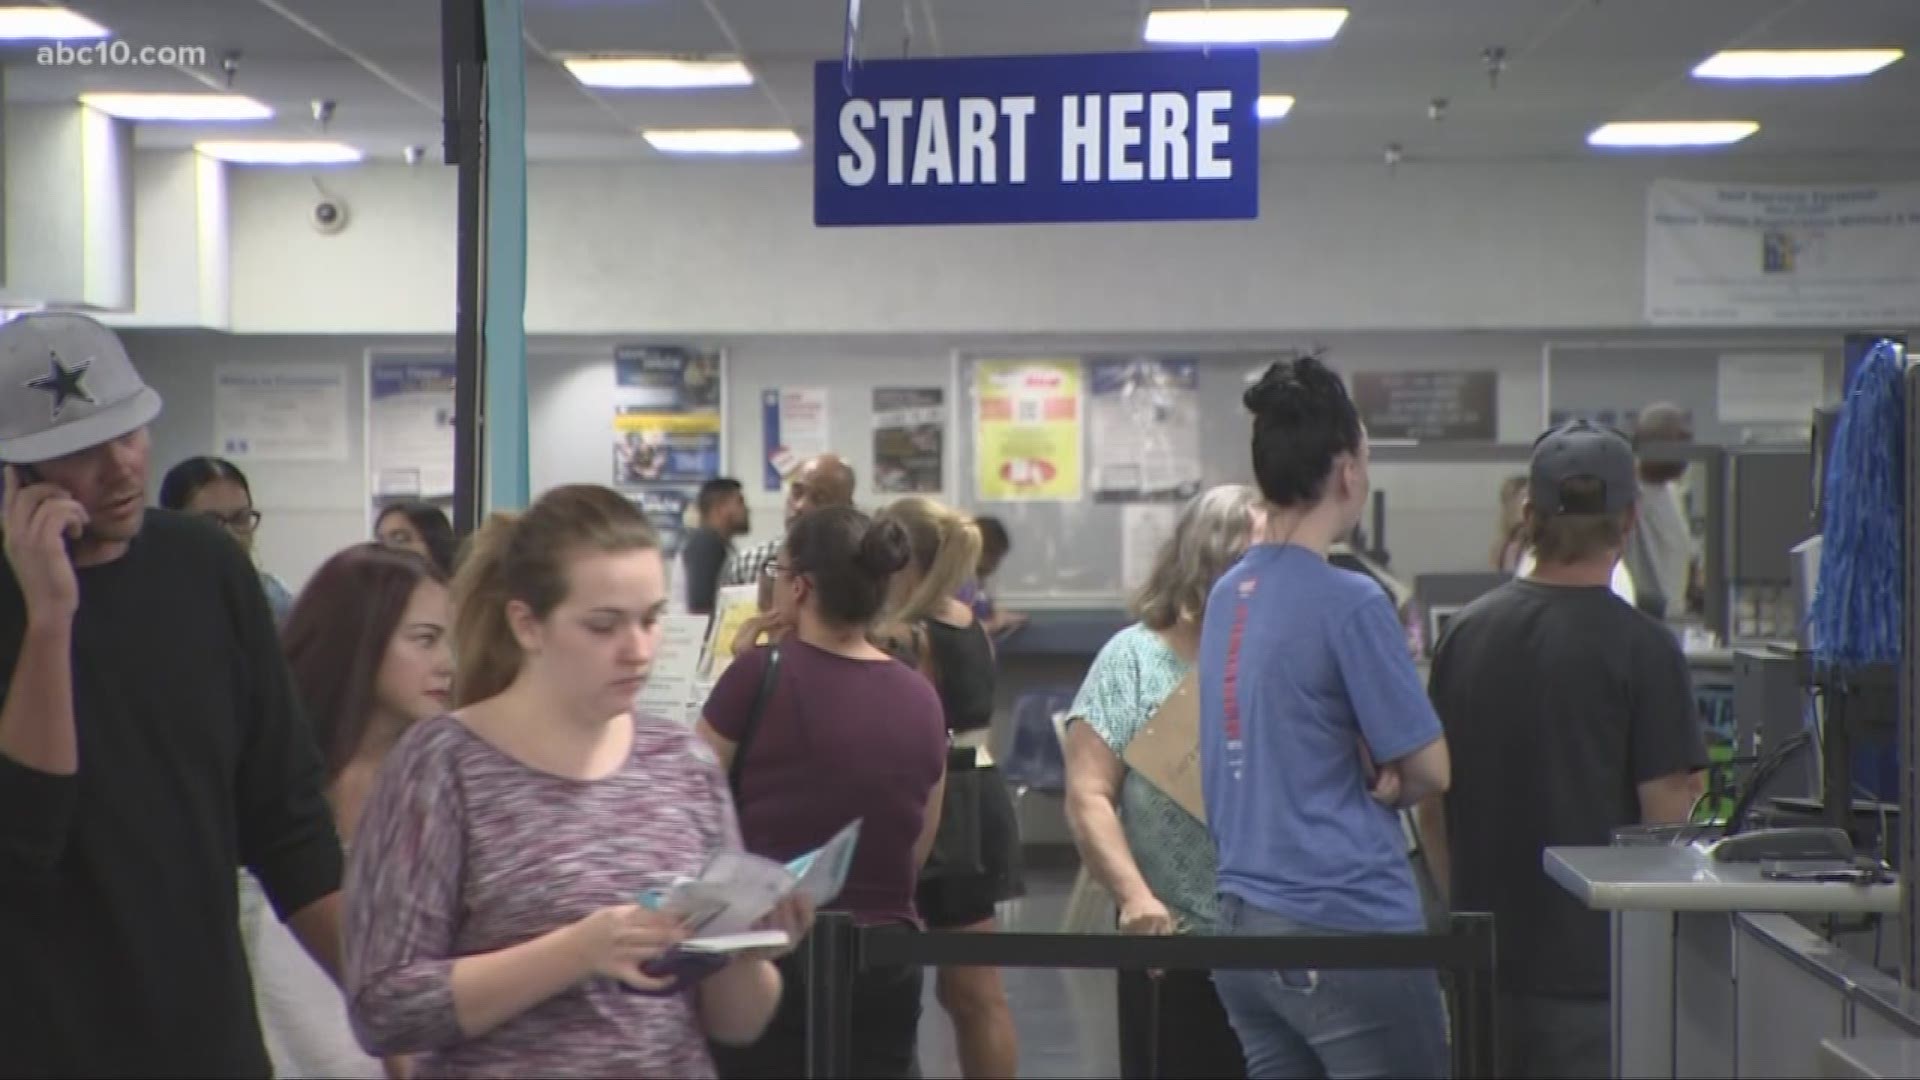 California lawmakers are seeking answers from the Department of Motor Vehicles about hourslong wait times that have prompted public outcry.